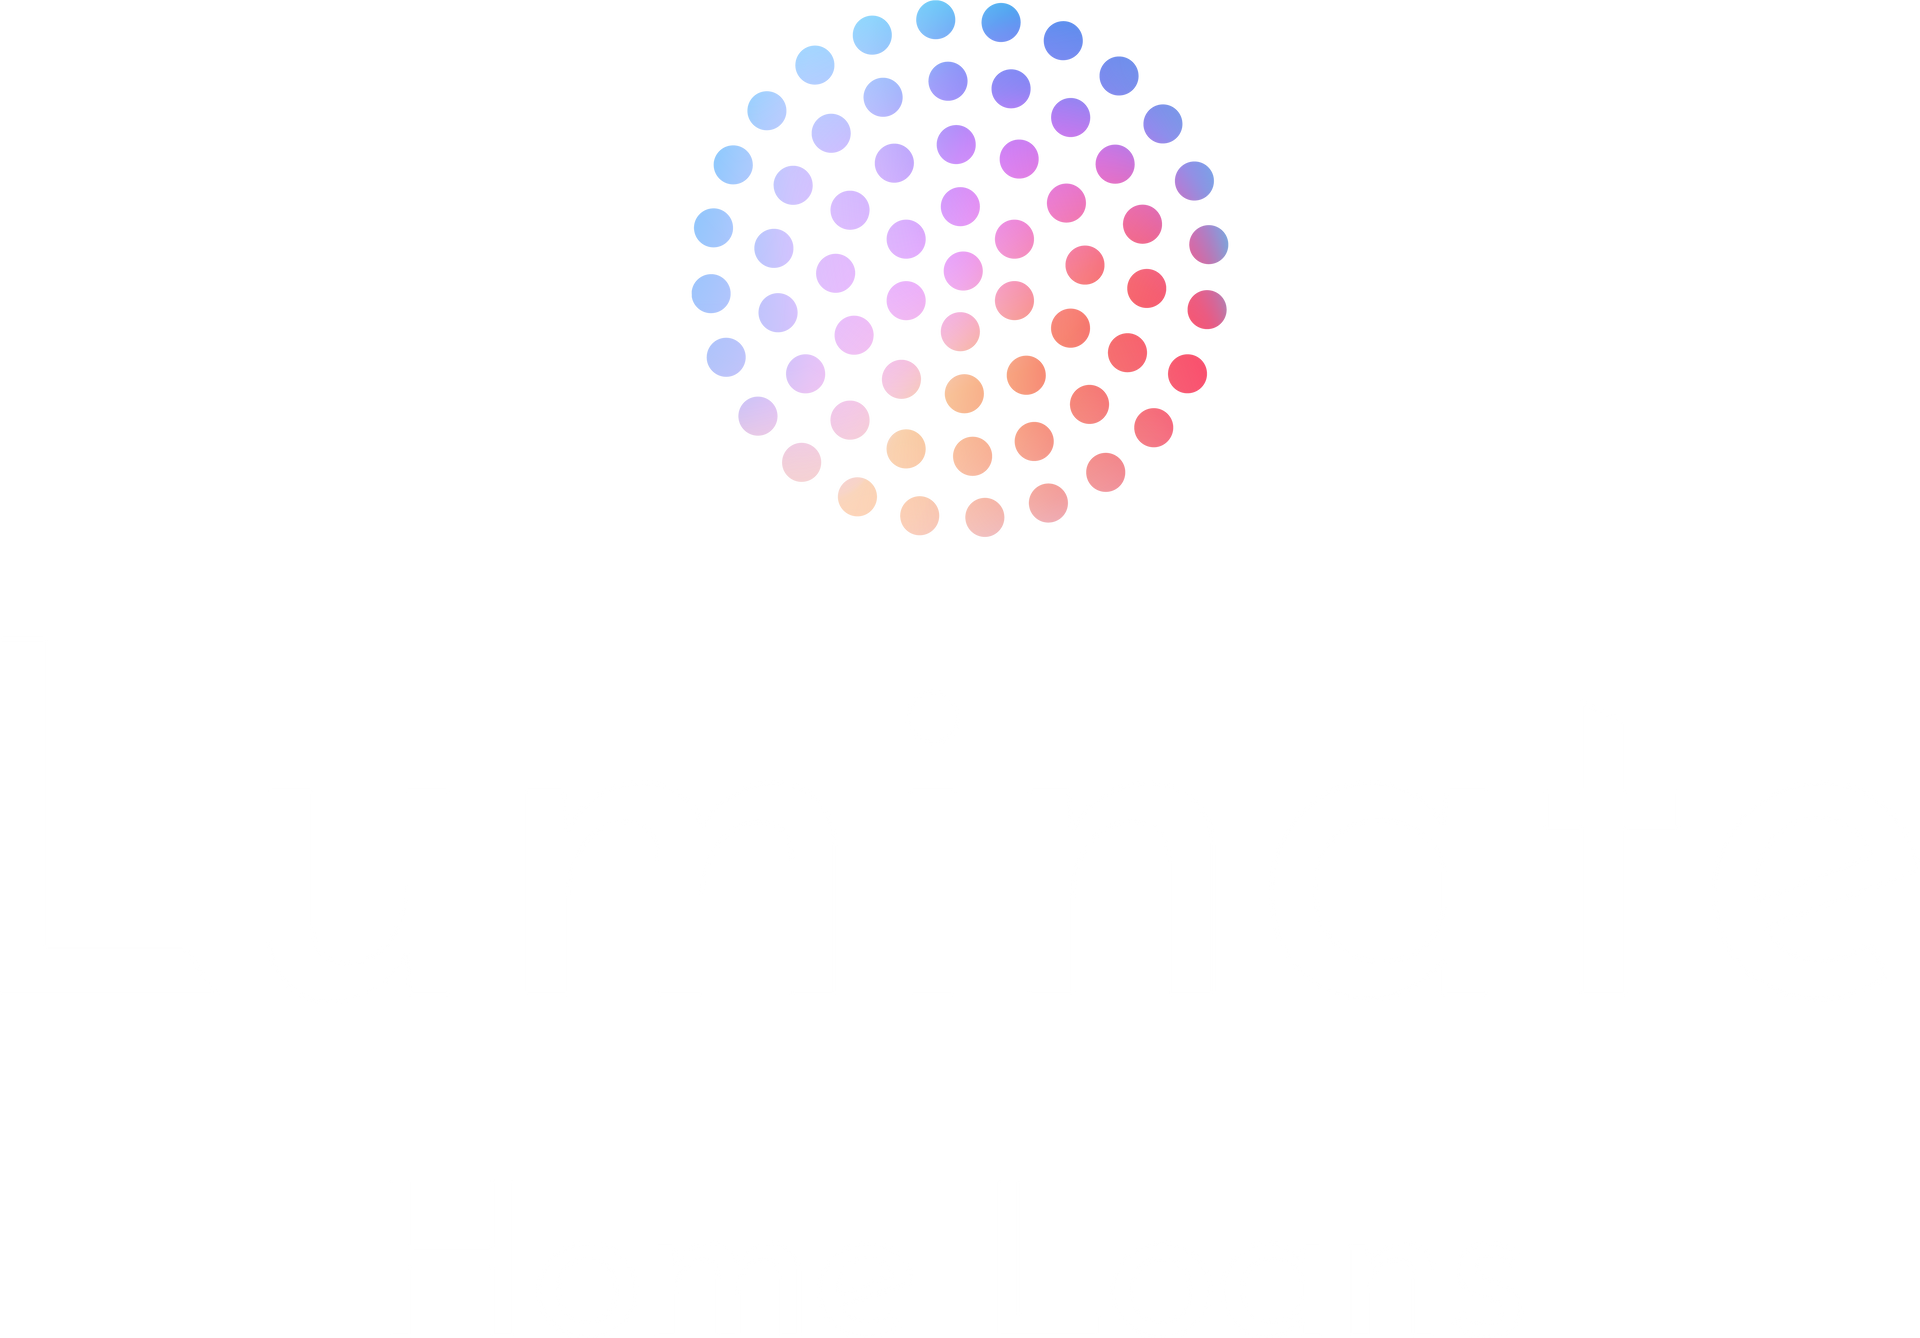 logo for luminate home loans with a circle of dots